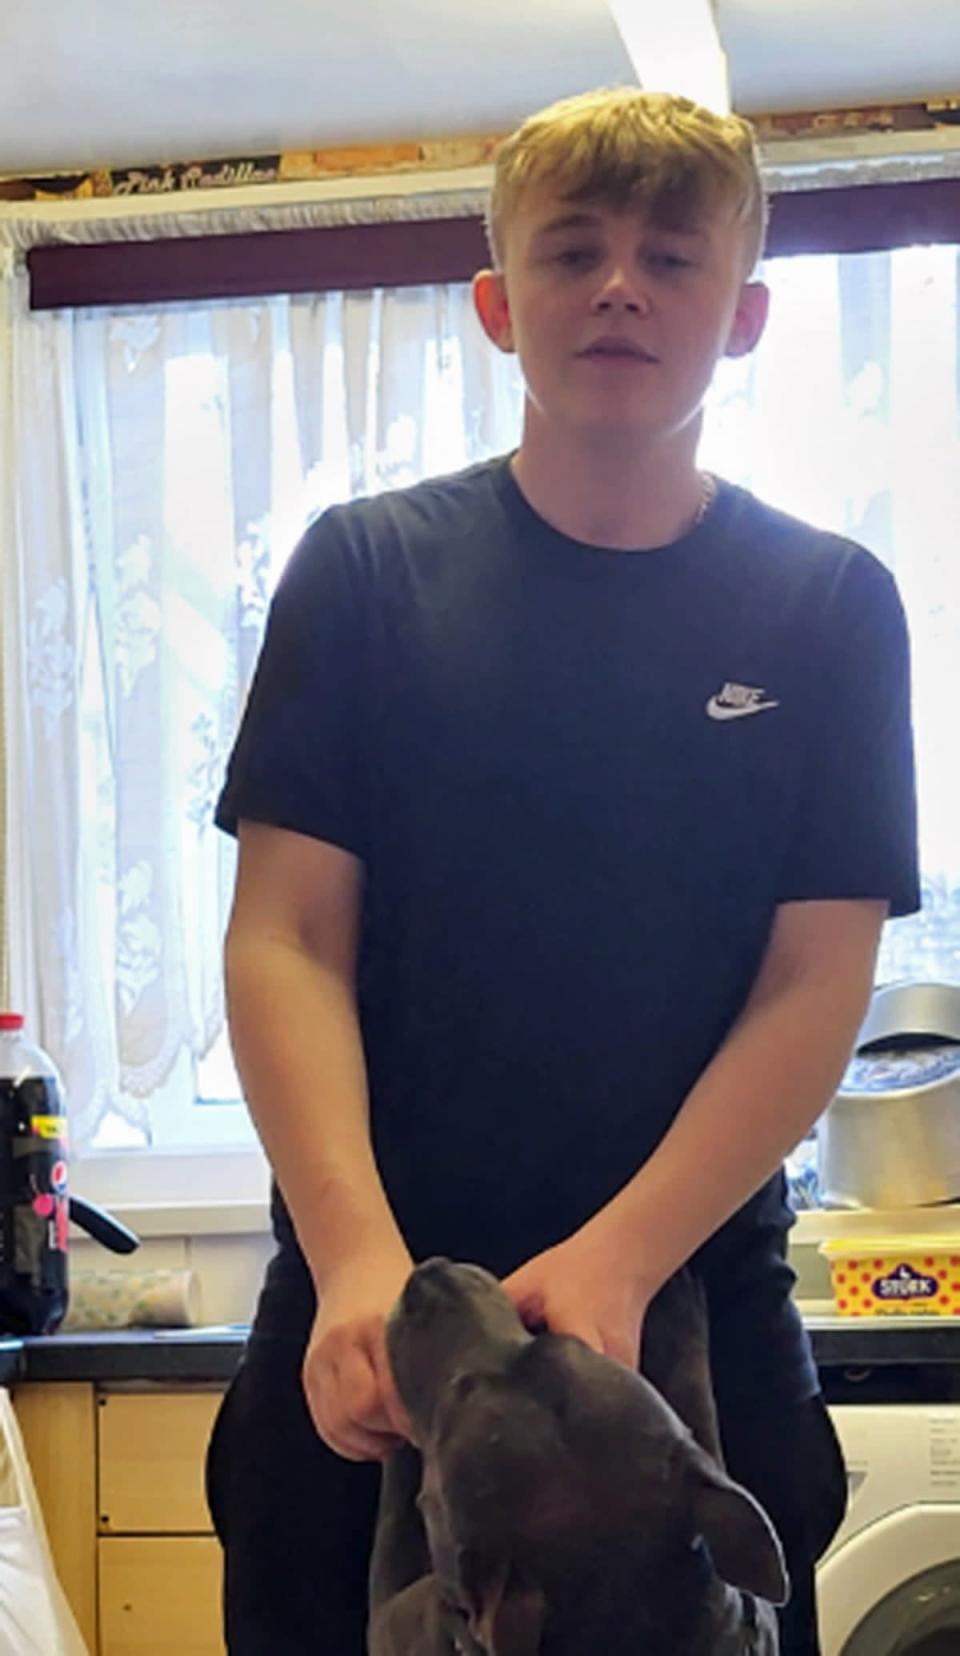 Tributes have been paid to a teenager who died after falling at a quarry.Myron Davies suffered fatal injuries and was pronounced dead at the scene of the incident in Limekiln Road in Pontypool, South Wales on July 6.The family of the 15-year-old, from Pontypool, described him as a “popular” and “happy boy” who “was loved by all” (Gwent Police/PA)